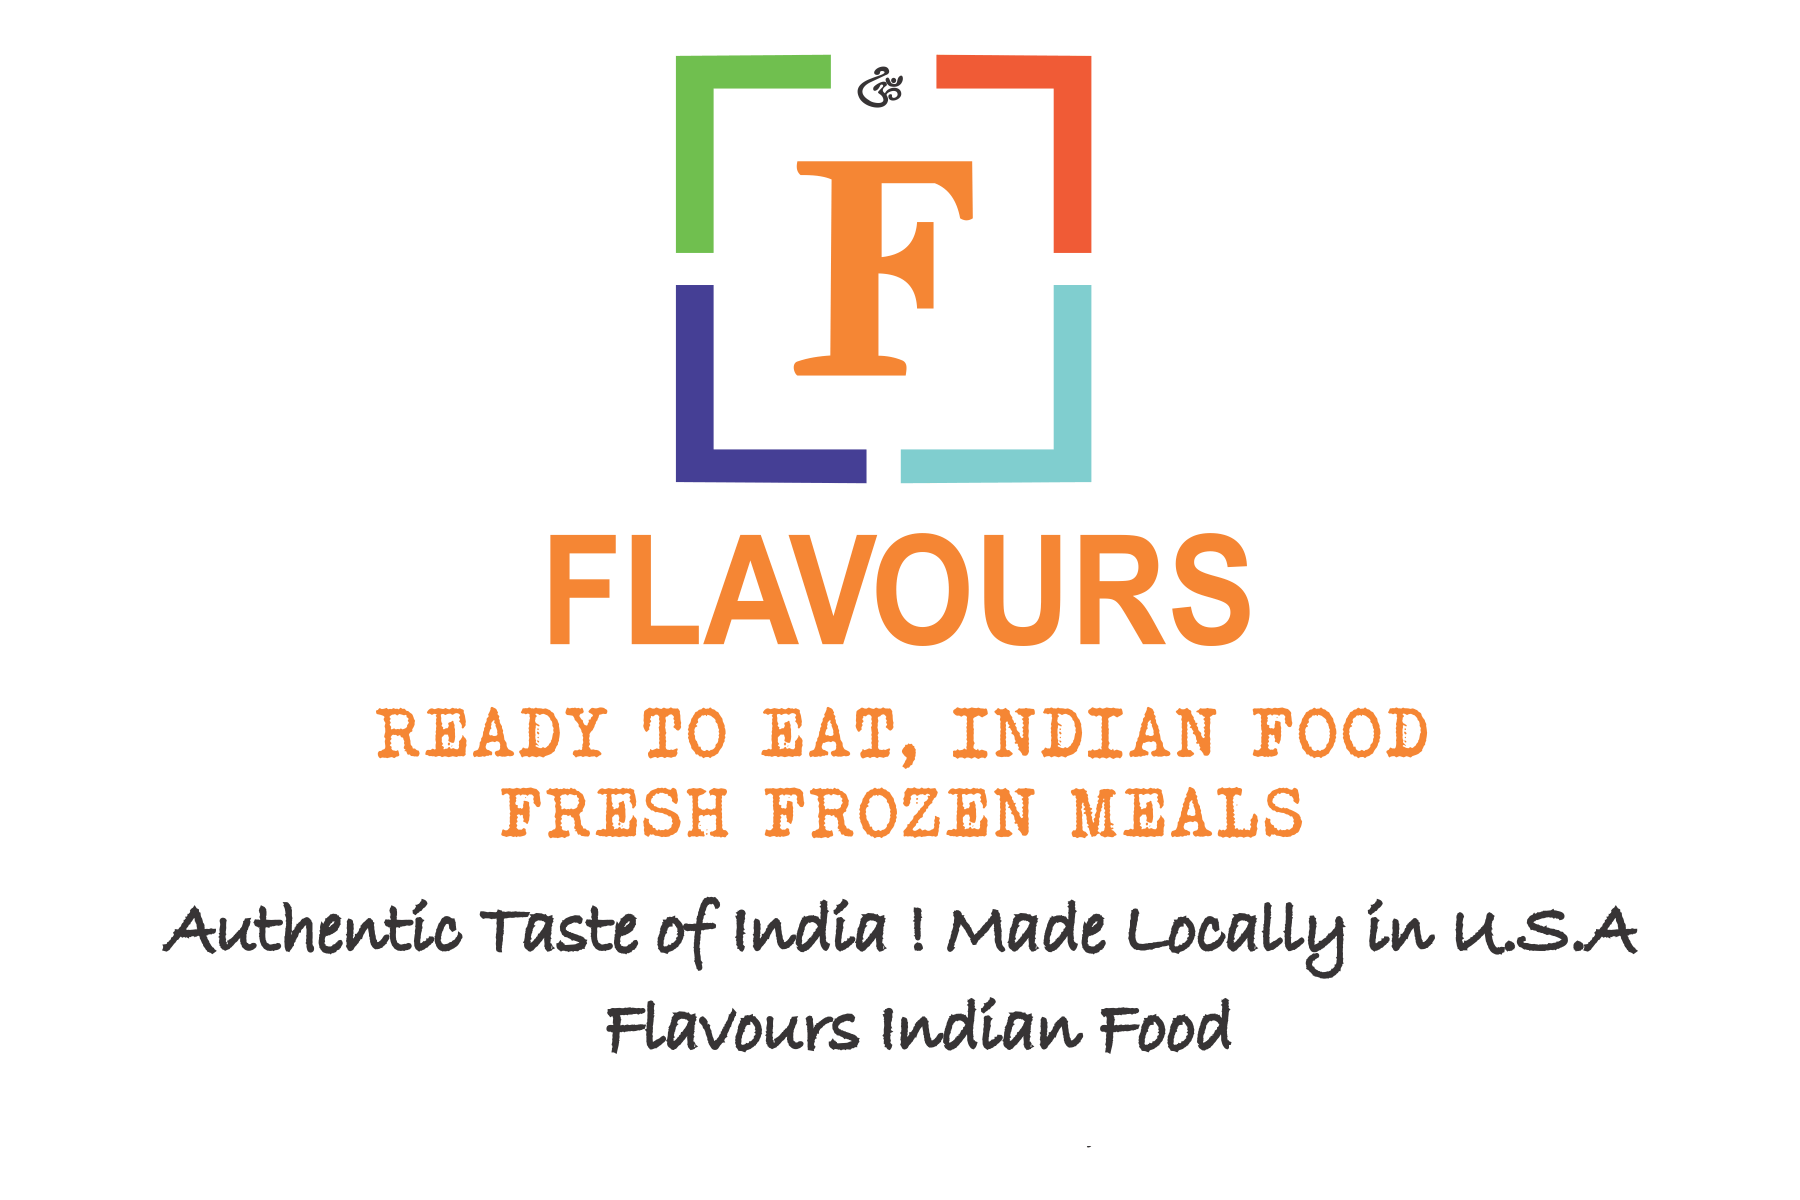 FLAVOURS - Ready to Eat, Fresh Indian Food